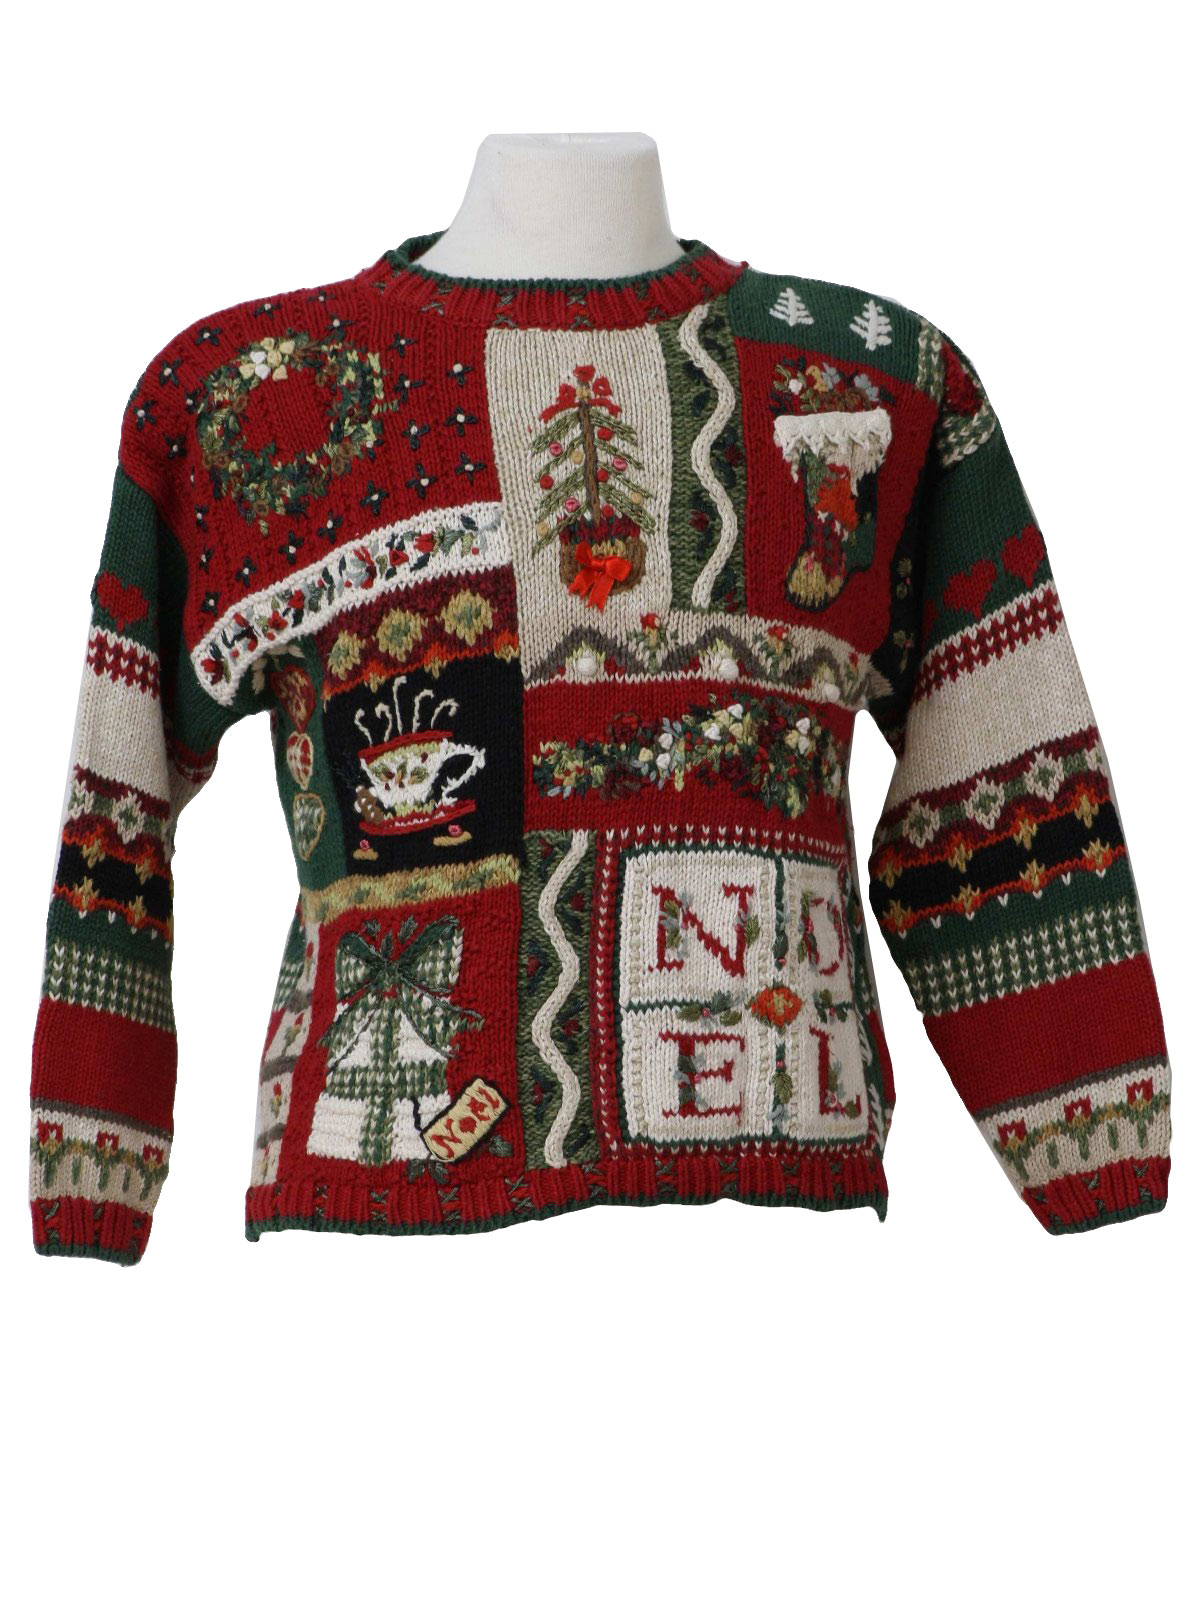 Womens Super Ugly Christmas Sweater: -Casual Corner- Womens red, tan ...